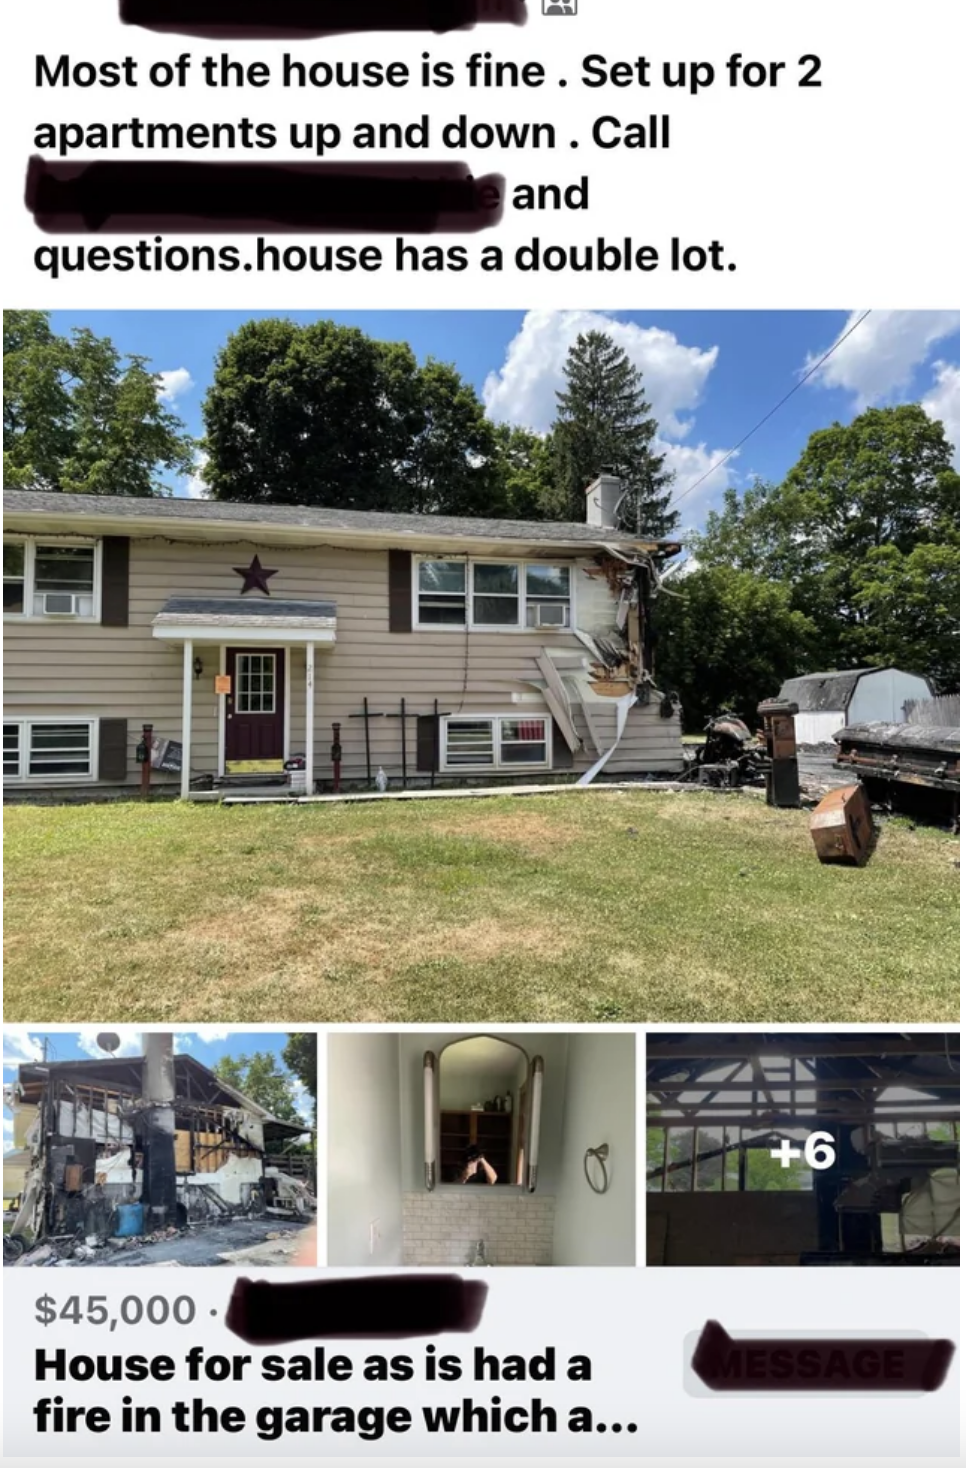 &quot;Most of the house is fine&quot;